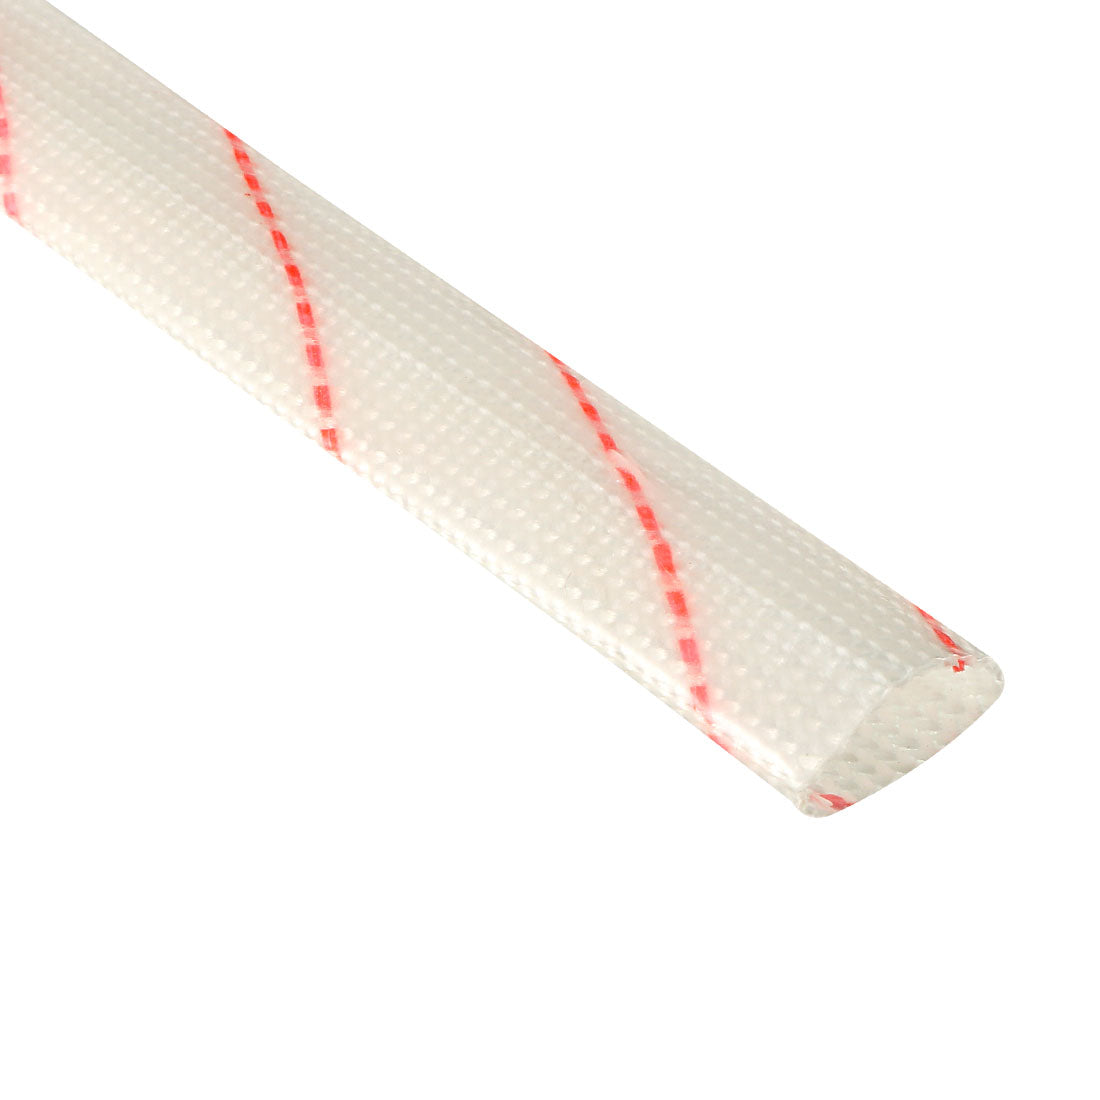 uxcell Uxcell Fiberglass Sleeve 10mm I.D. PVC Insulation Tubing 1500V Tube Adjustable Sleeving Pipe 125 Degree Centigrade Cable Wrap Wire 885mm 2.9ft White and Red